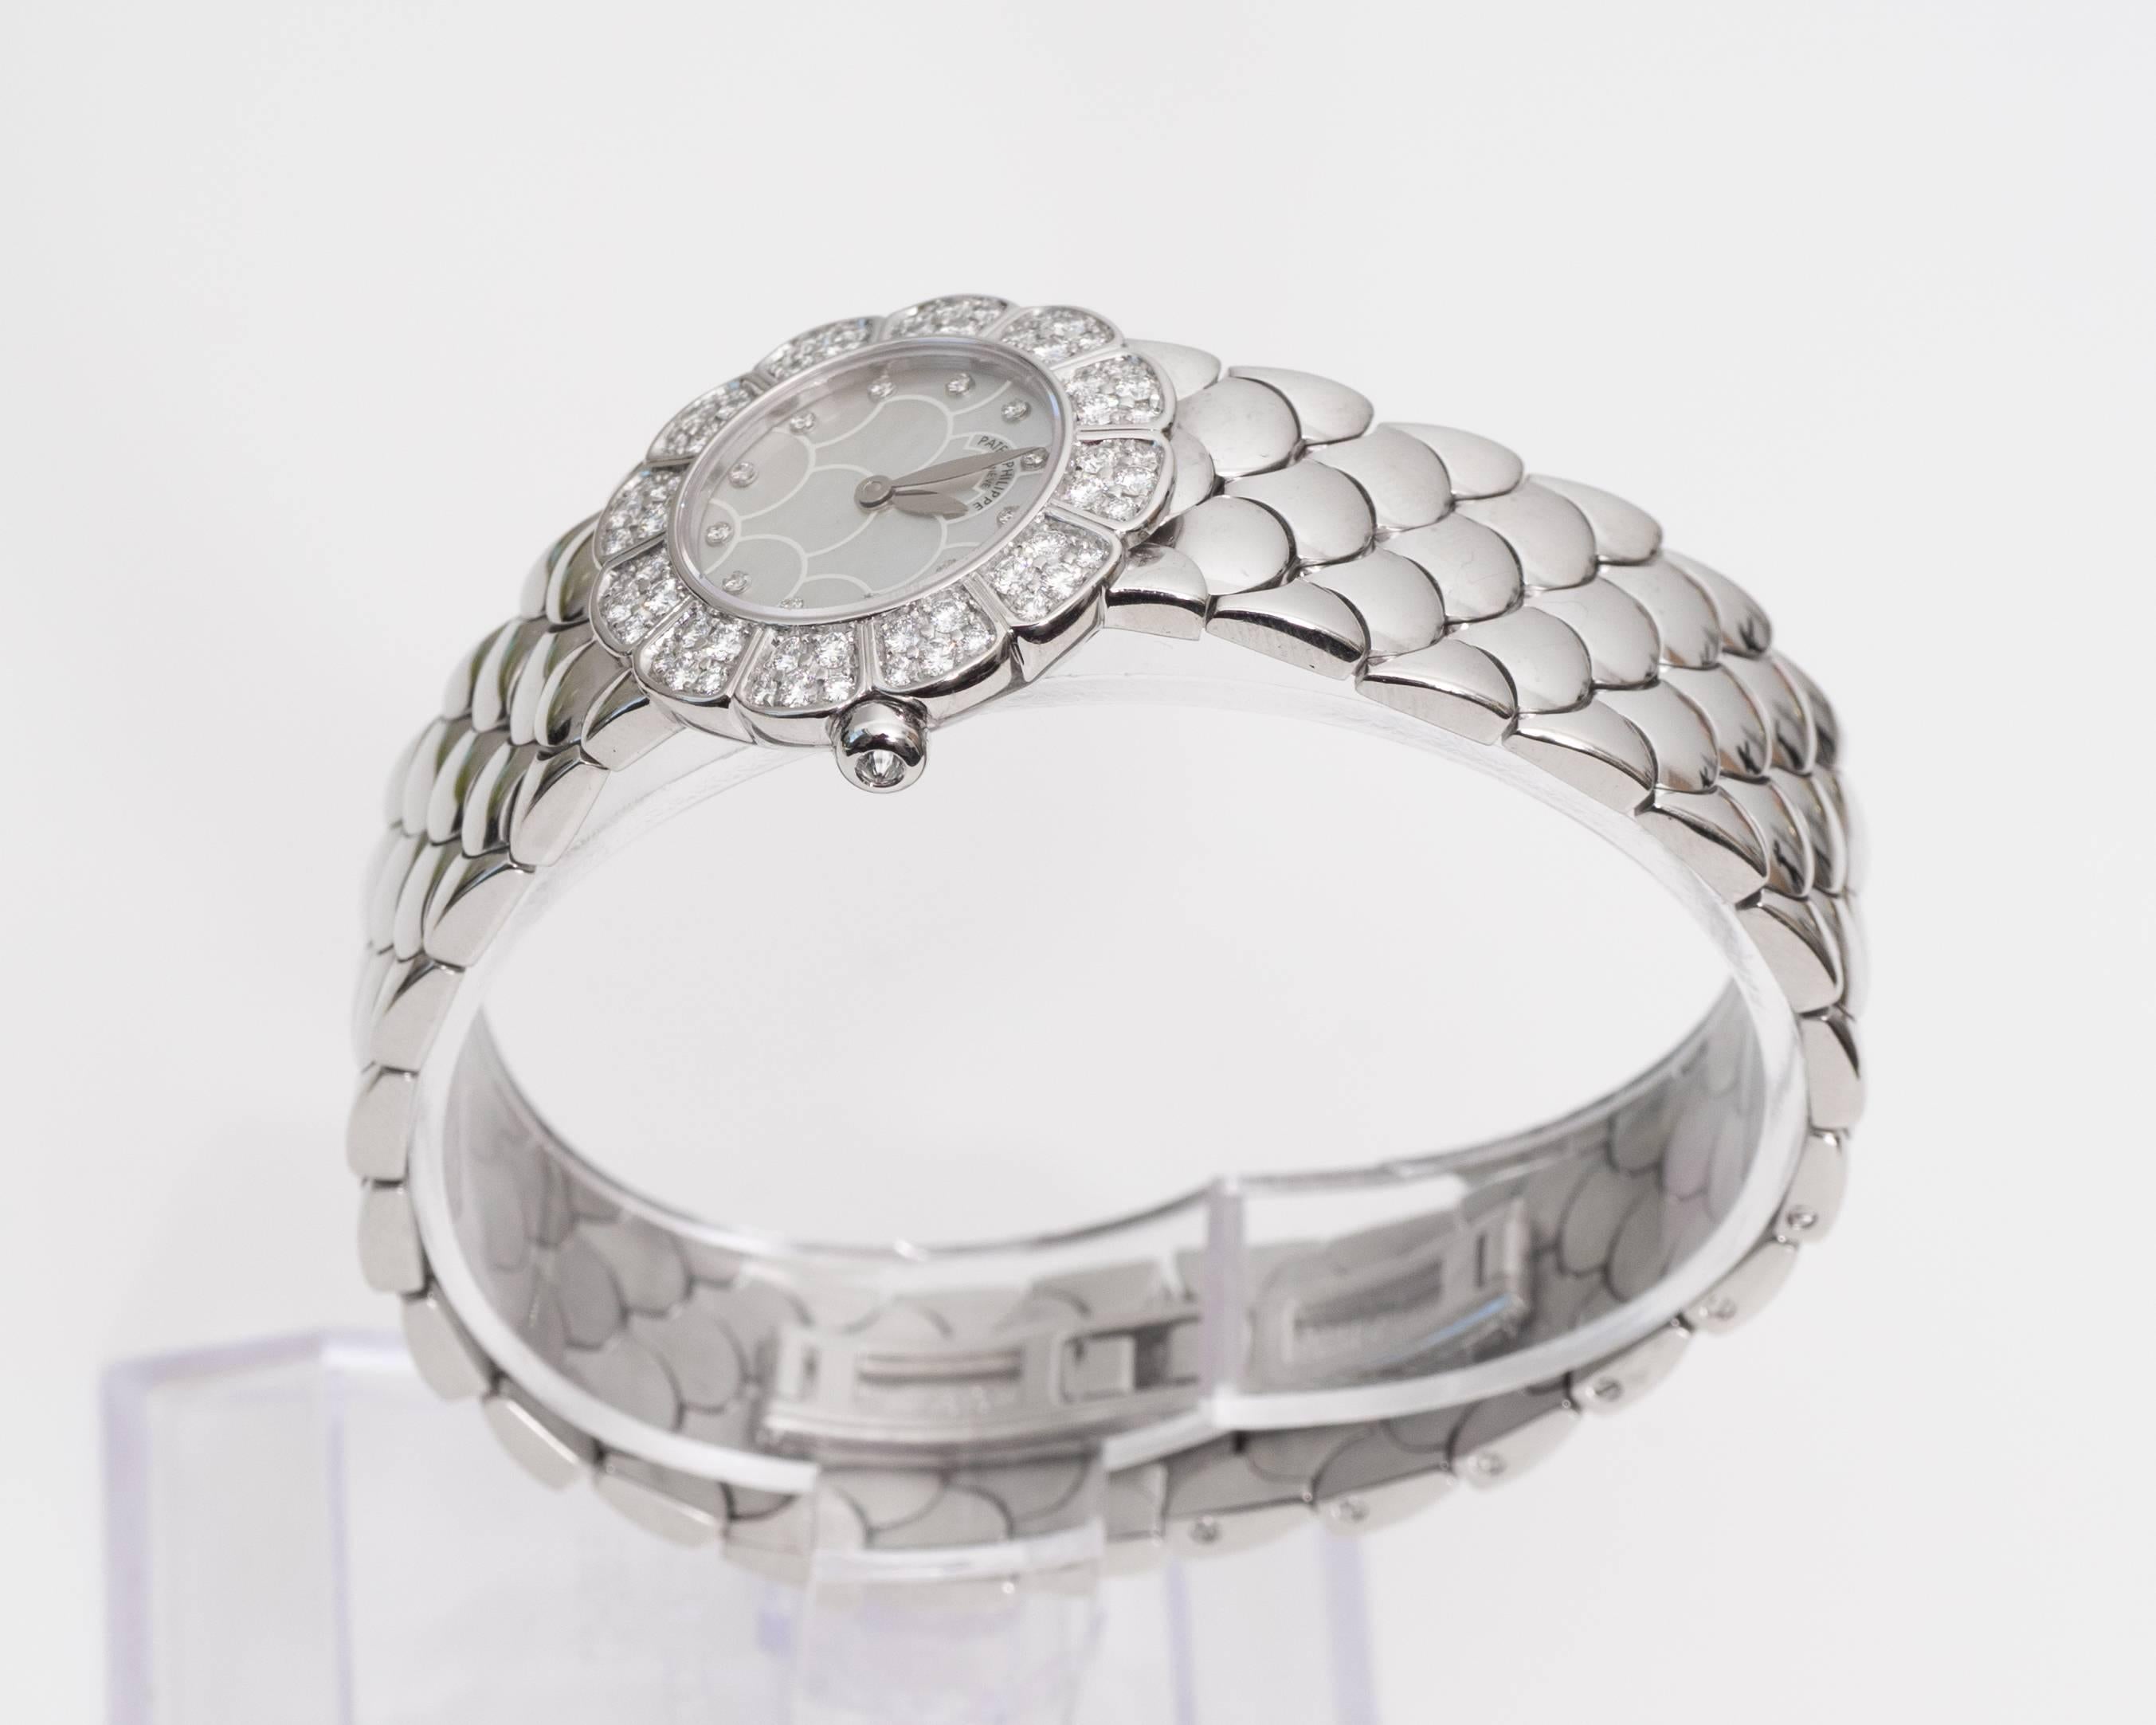 1980s
Patek Philipe
Womens Wrist Watch
18 Karat White Gold with Diamonds, 0.50 carats total
Diamonds are F color VS clarity
Fits up to 7.7 inch wrist 
Quartz Movement
Bracelet features a fish-scale link pattern
Recently Polished and Serviced, Mint